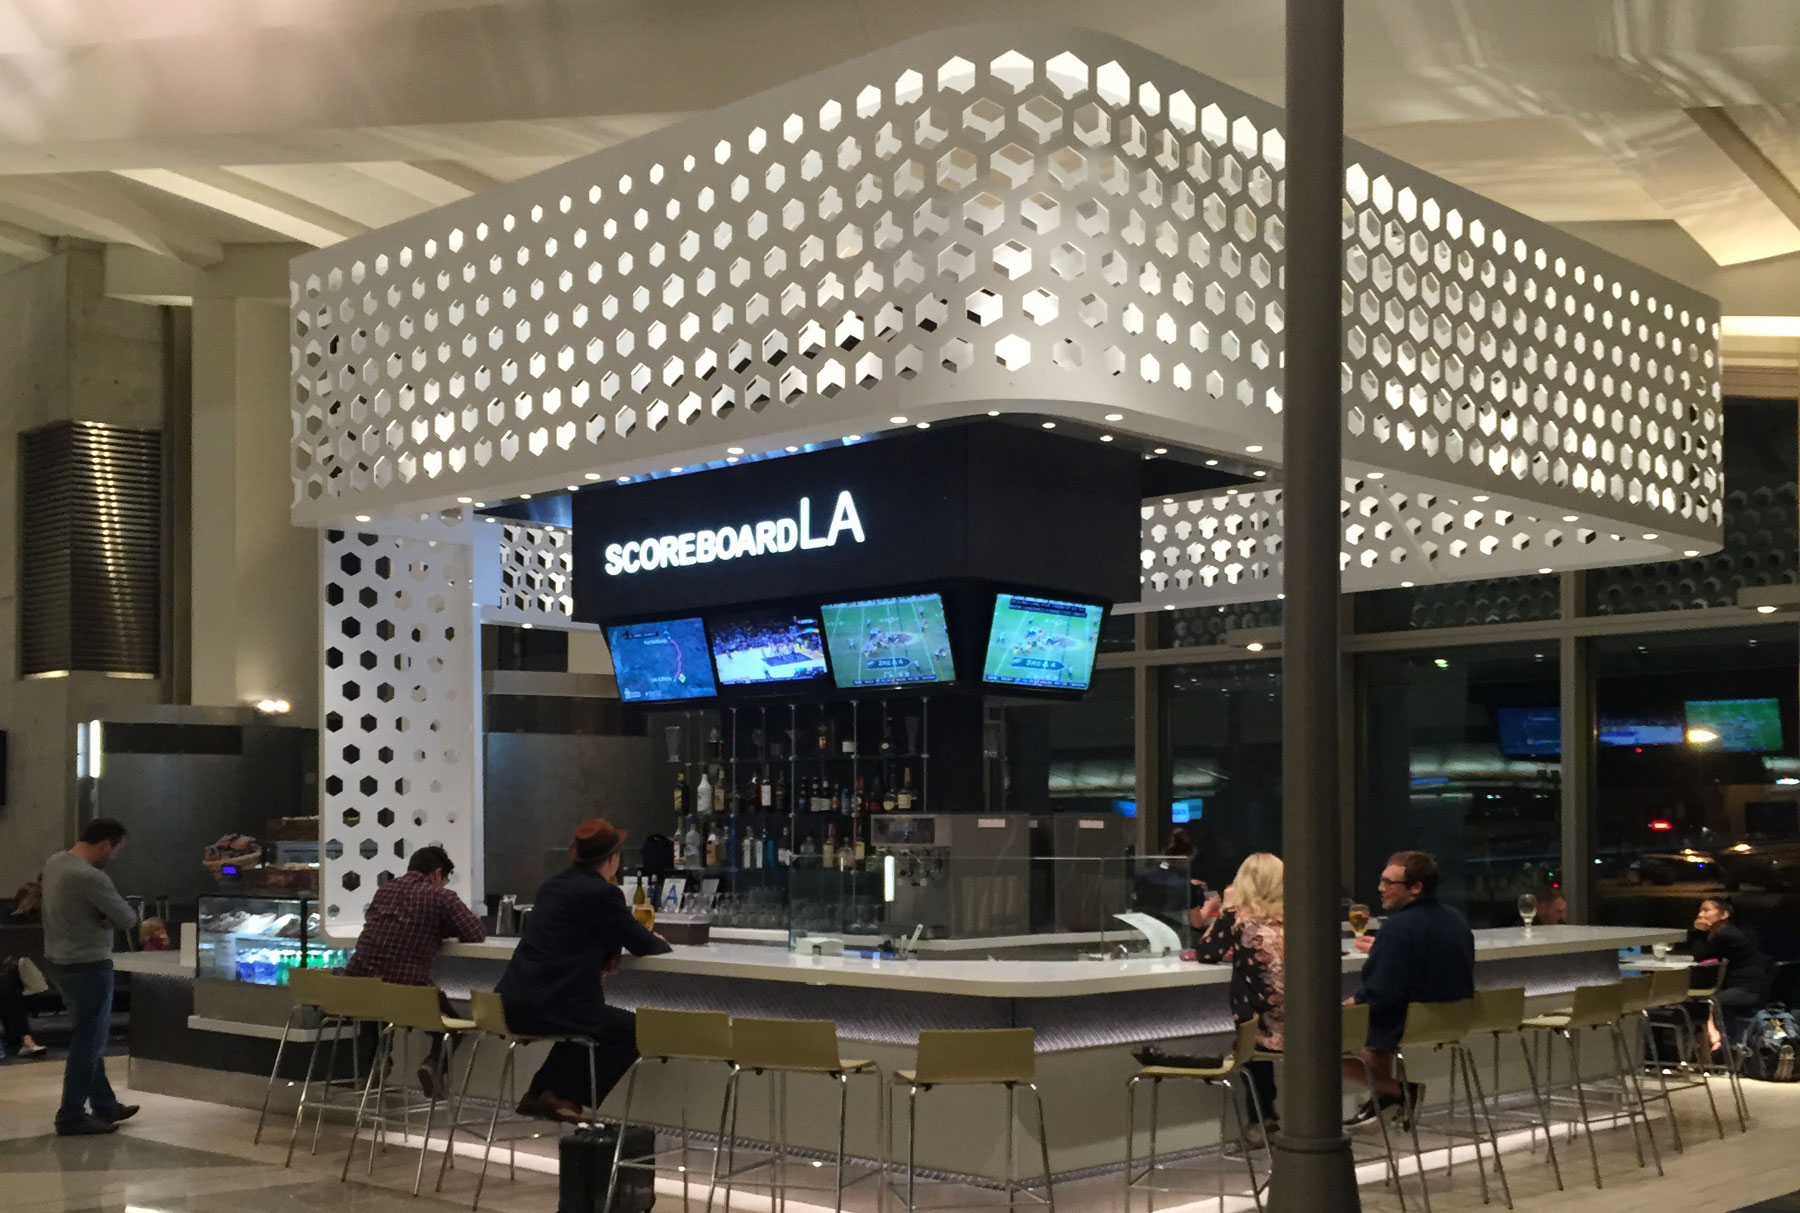  This Scoreboard sports bar in LAX Airport features an Arktura canopy above the bar area. There are four people sitting at the bar. 